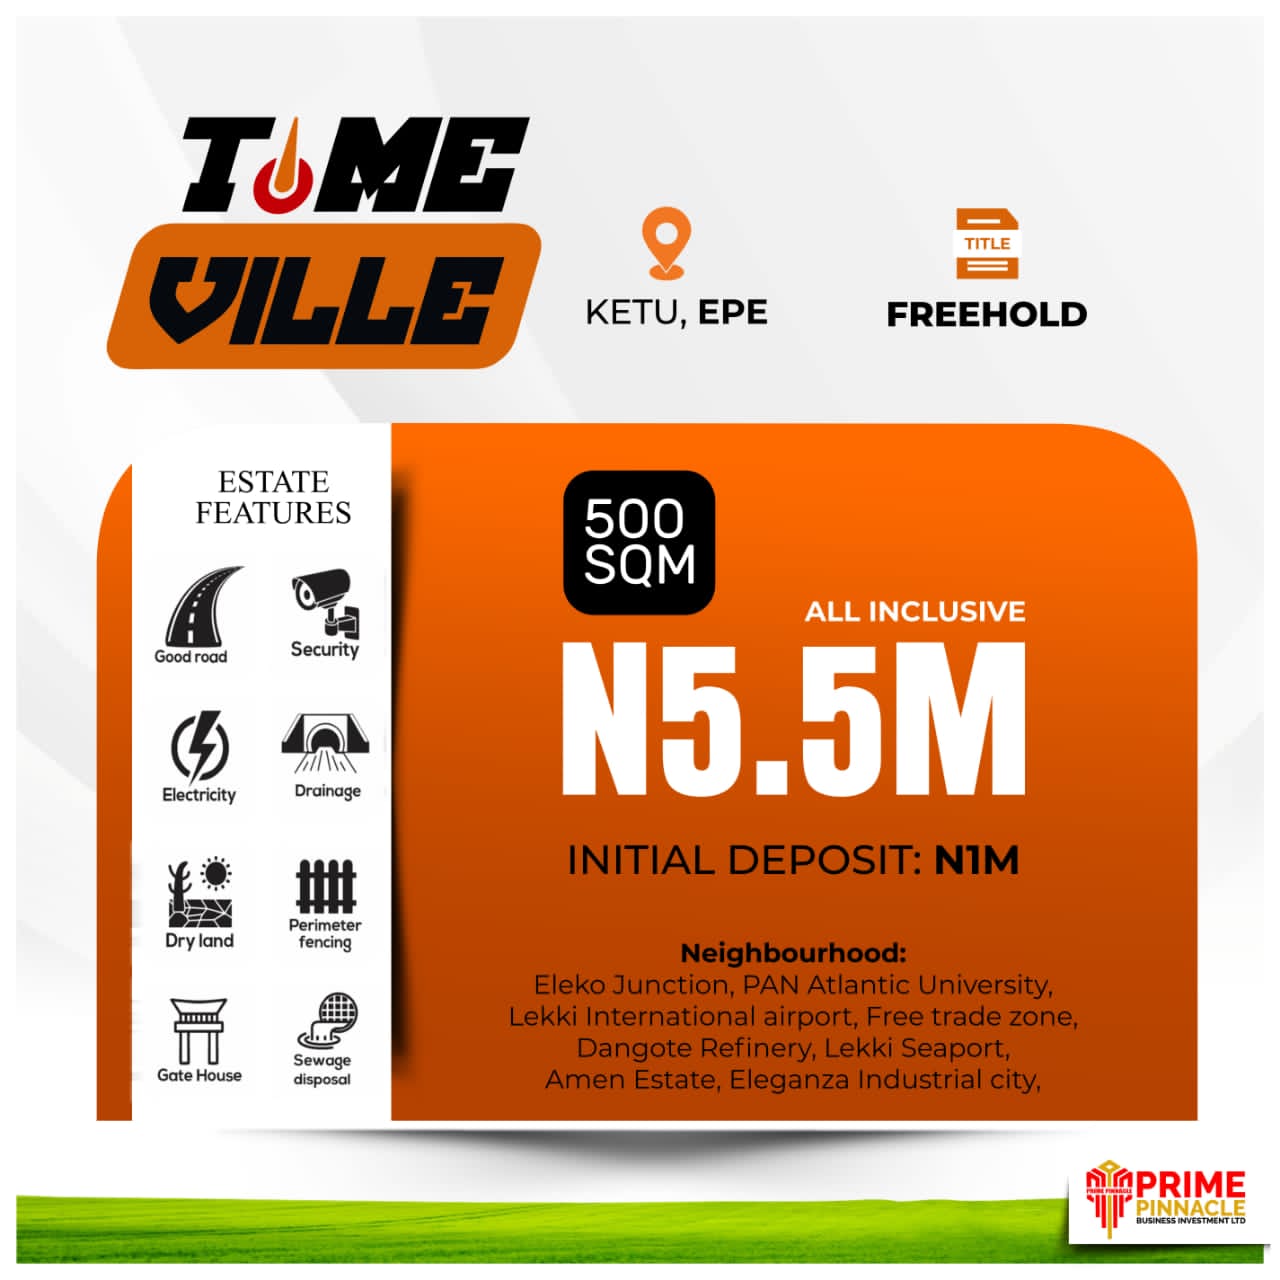 TIMEVILLE ESTATE, EPE BY PRIME PINNACLE. Investment property